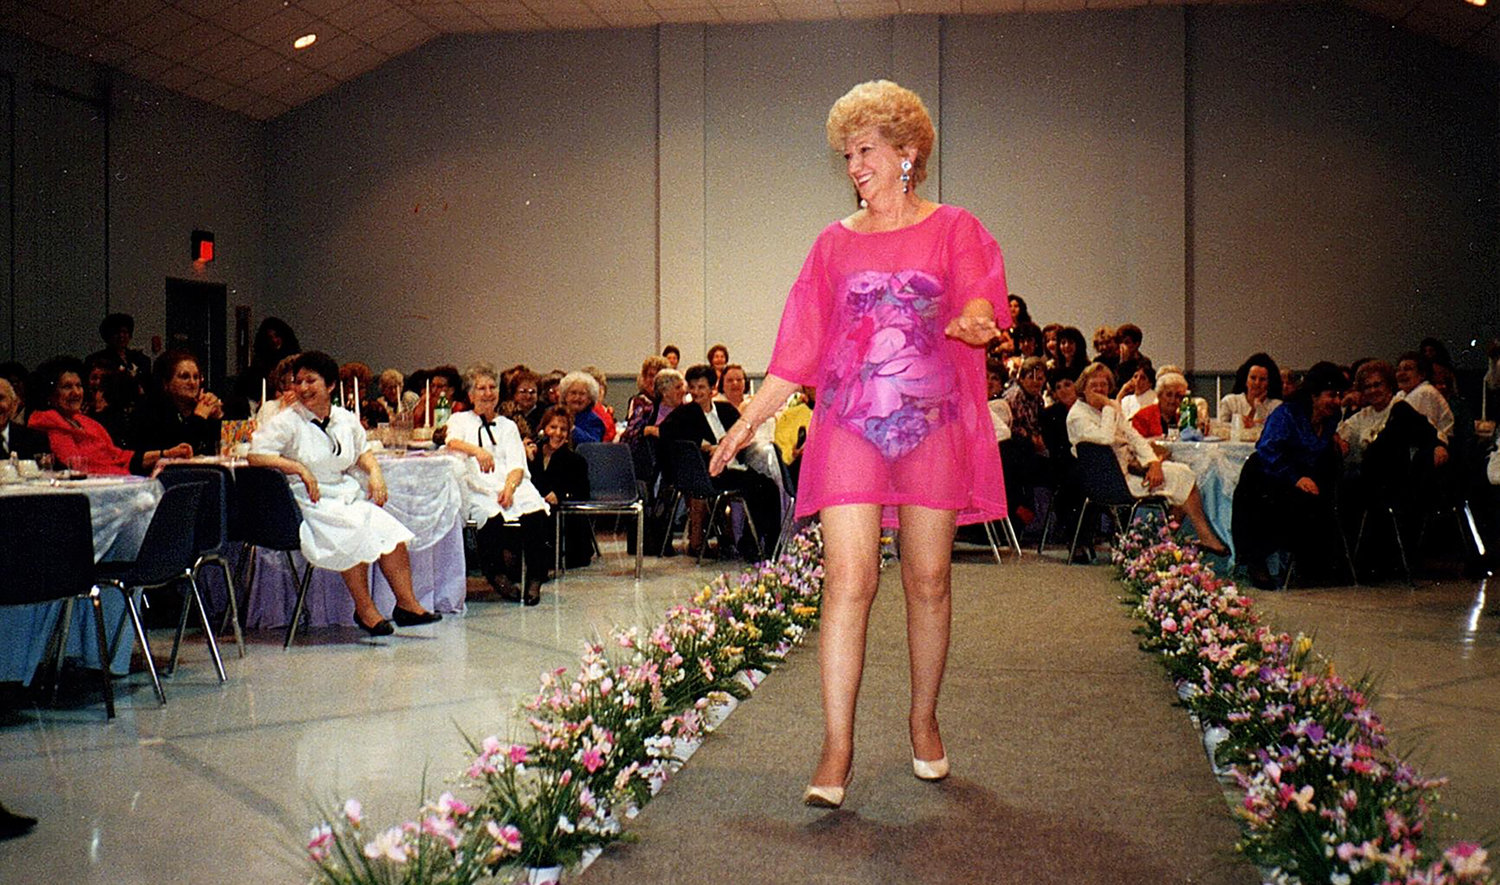 At the St. Rocco’s fashion show in 1993, she even modeled the swimsuit collections. She was one of the oldest women to have walked the runway for the fundraiser.